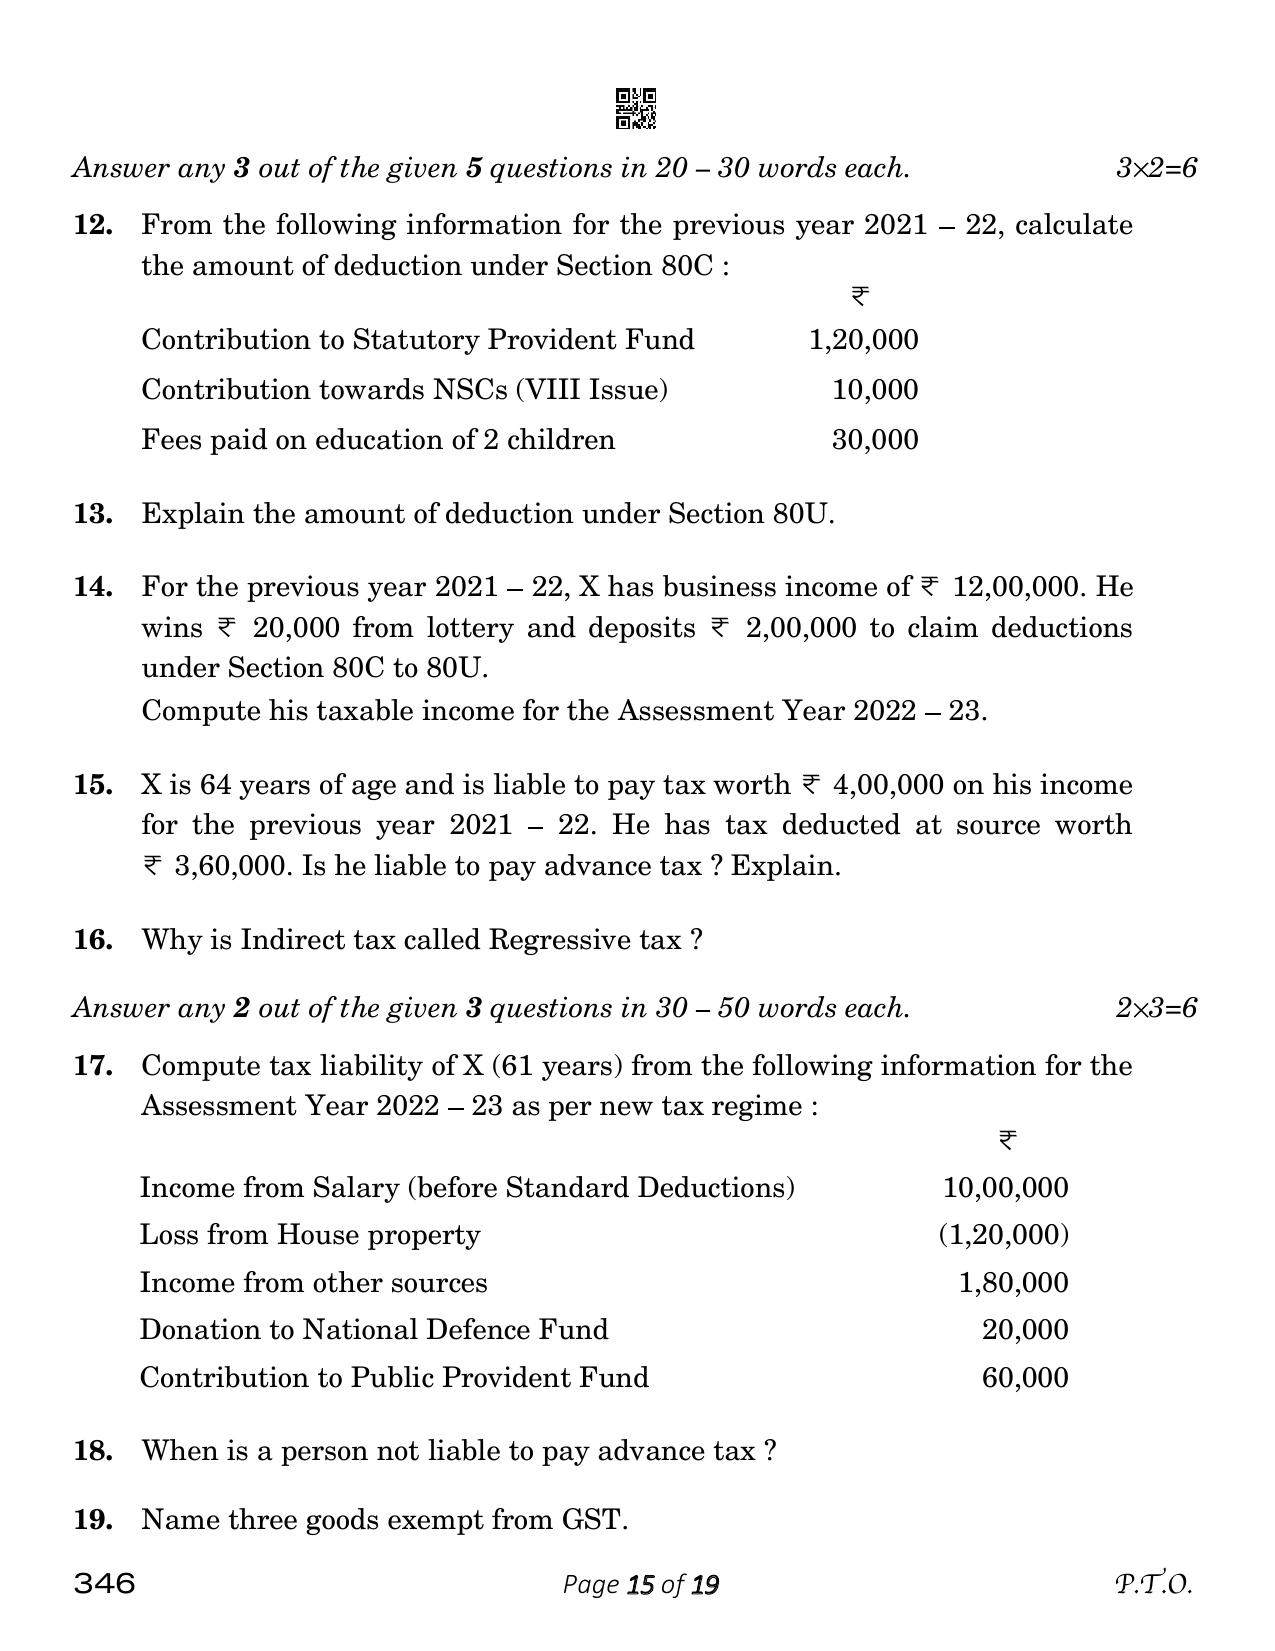 CBSE Class 12 Taxation (Compartment) 2023 Question Paper - Page 15